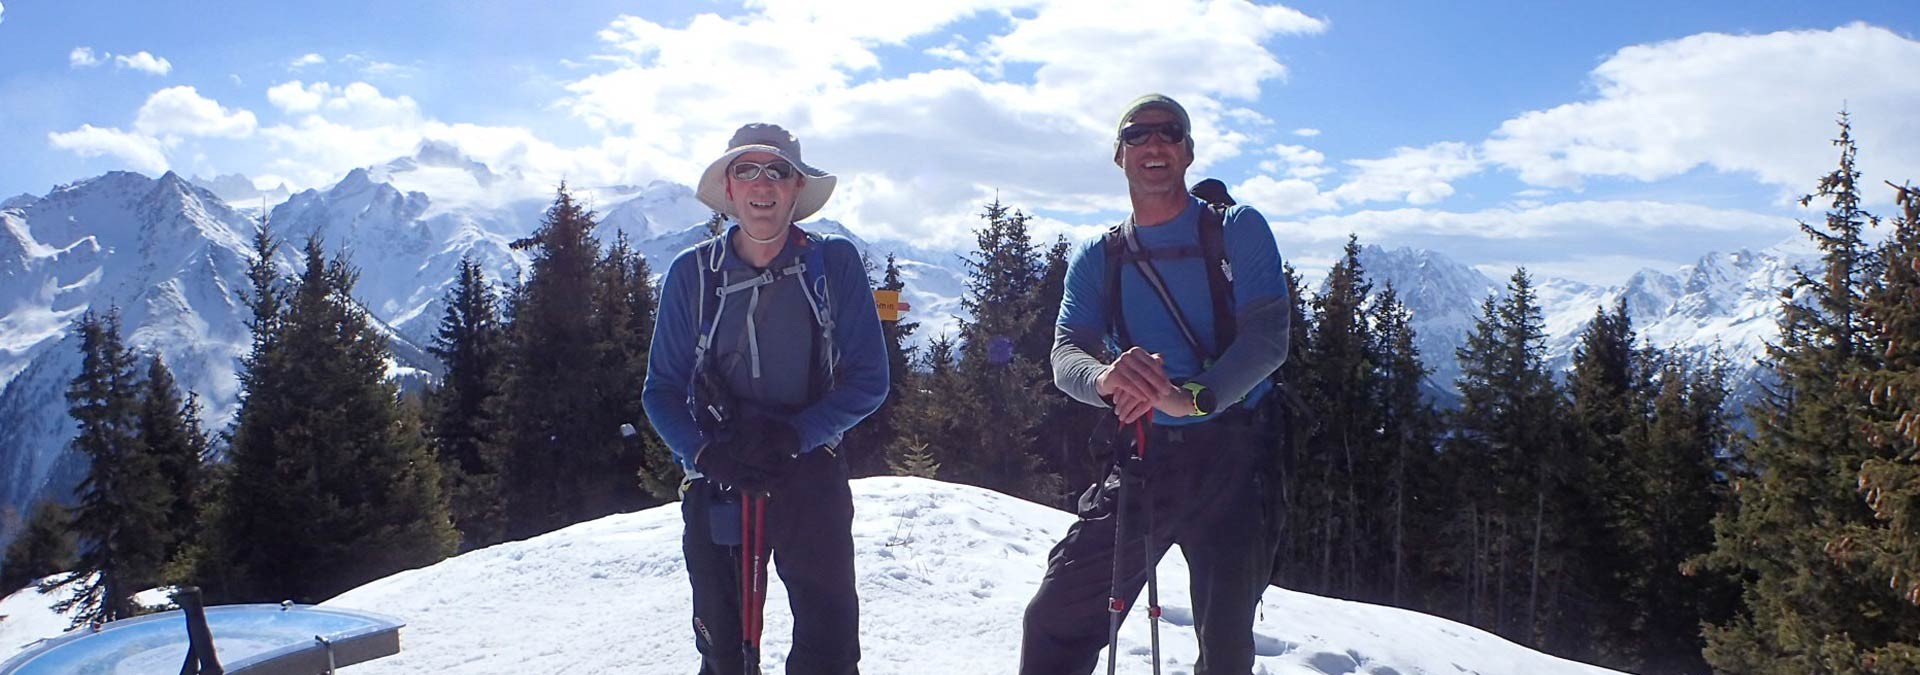 Chamonix Snowshoe Adventure - the Prarion summit in perfect conditions